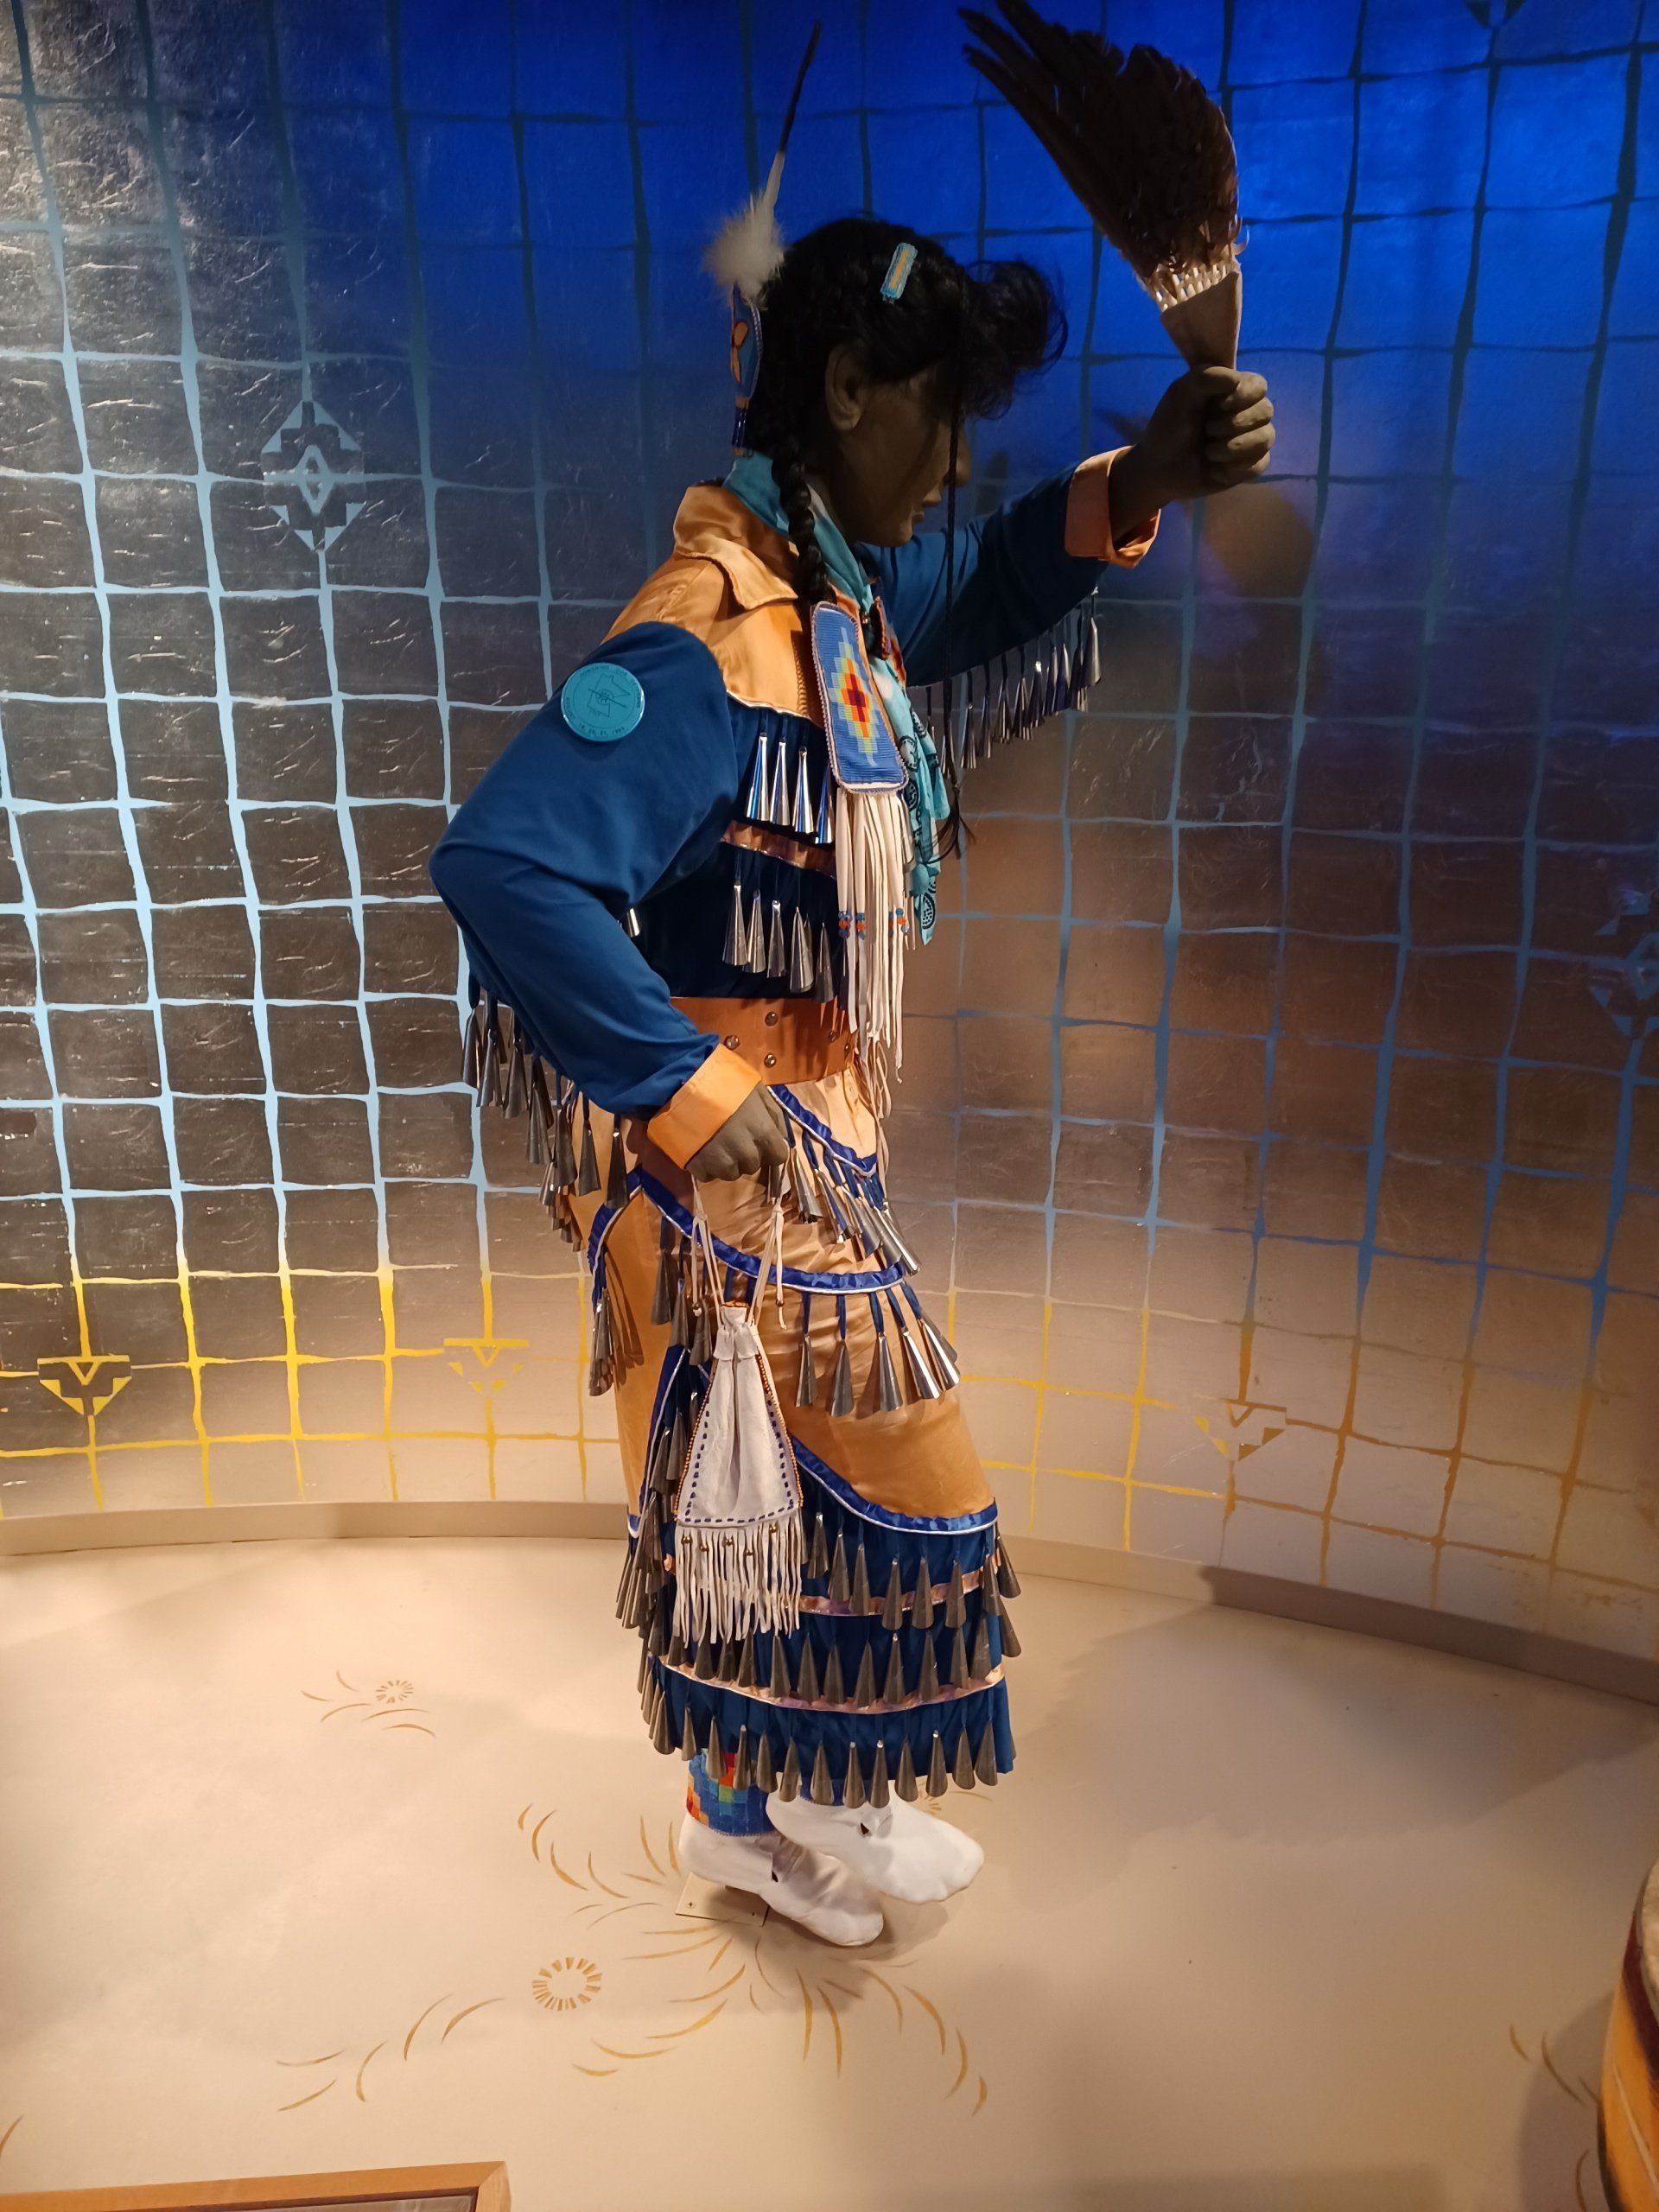 Jingle Dress on display at the Mille Lacs Indian Museum